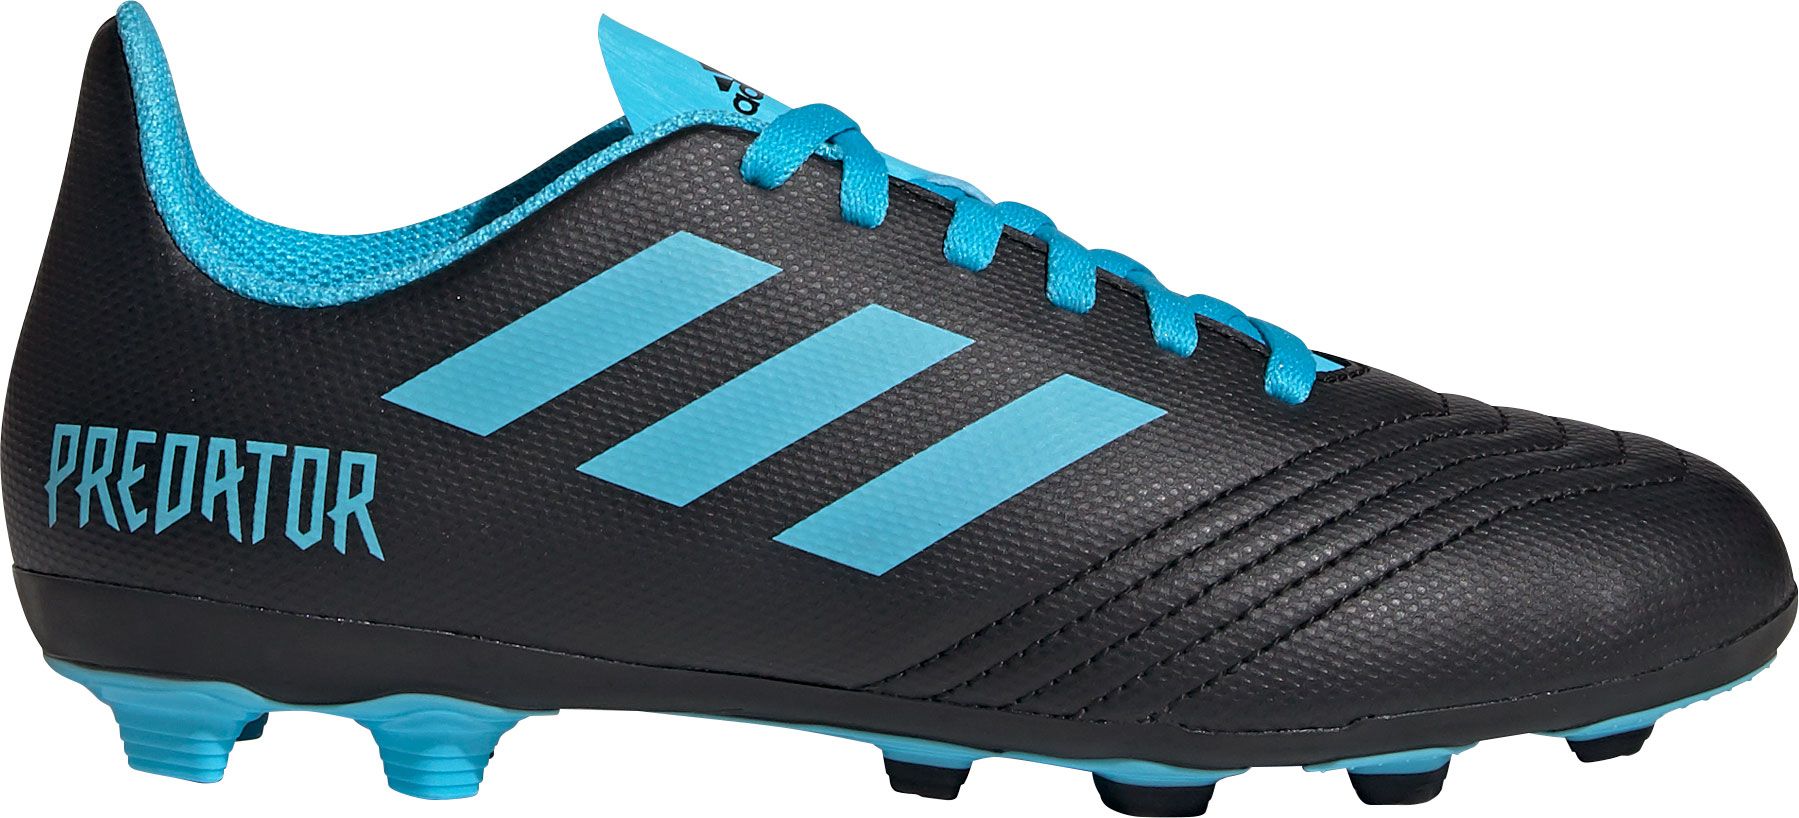 teal youth soccer cleats